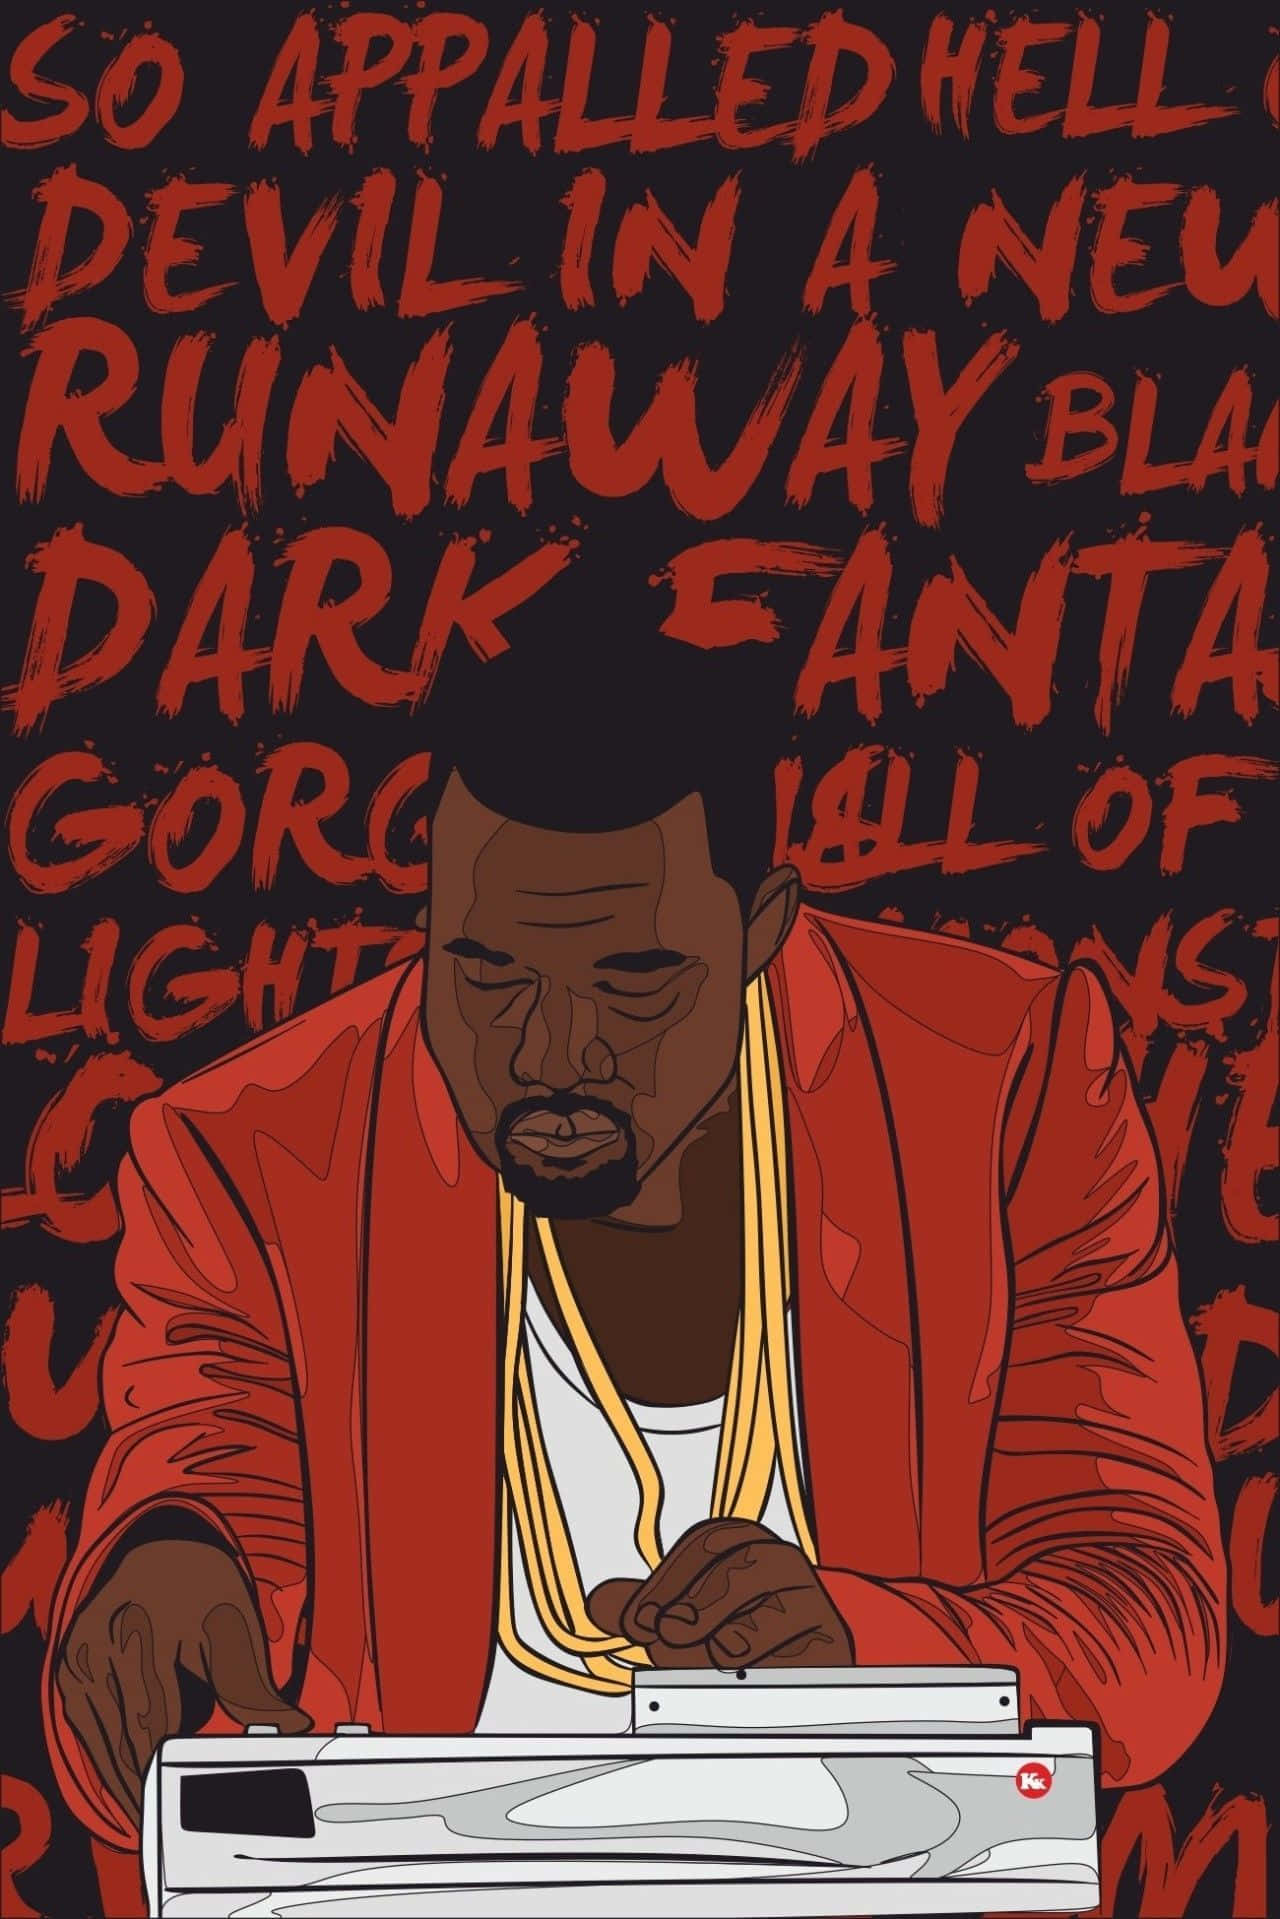 Papelde Parede Legal Do Kanye West - My Beautiful Dark Twisted Fantasy. Papel de Parede